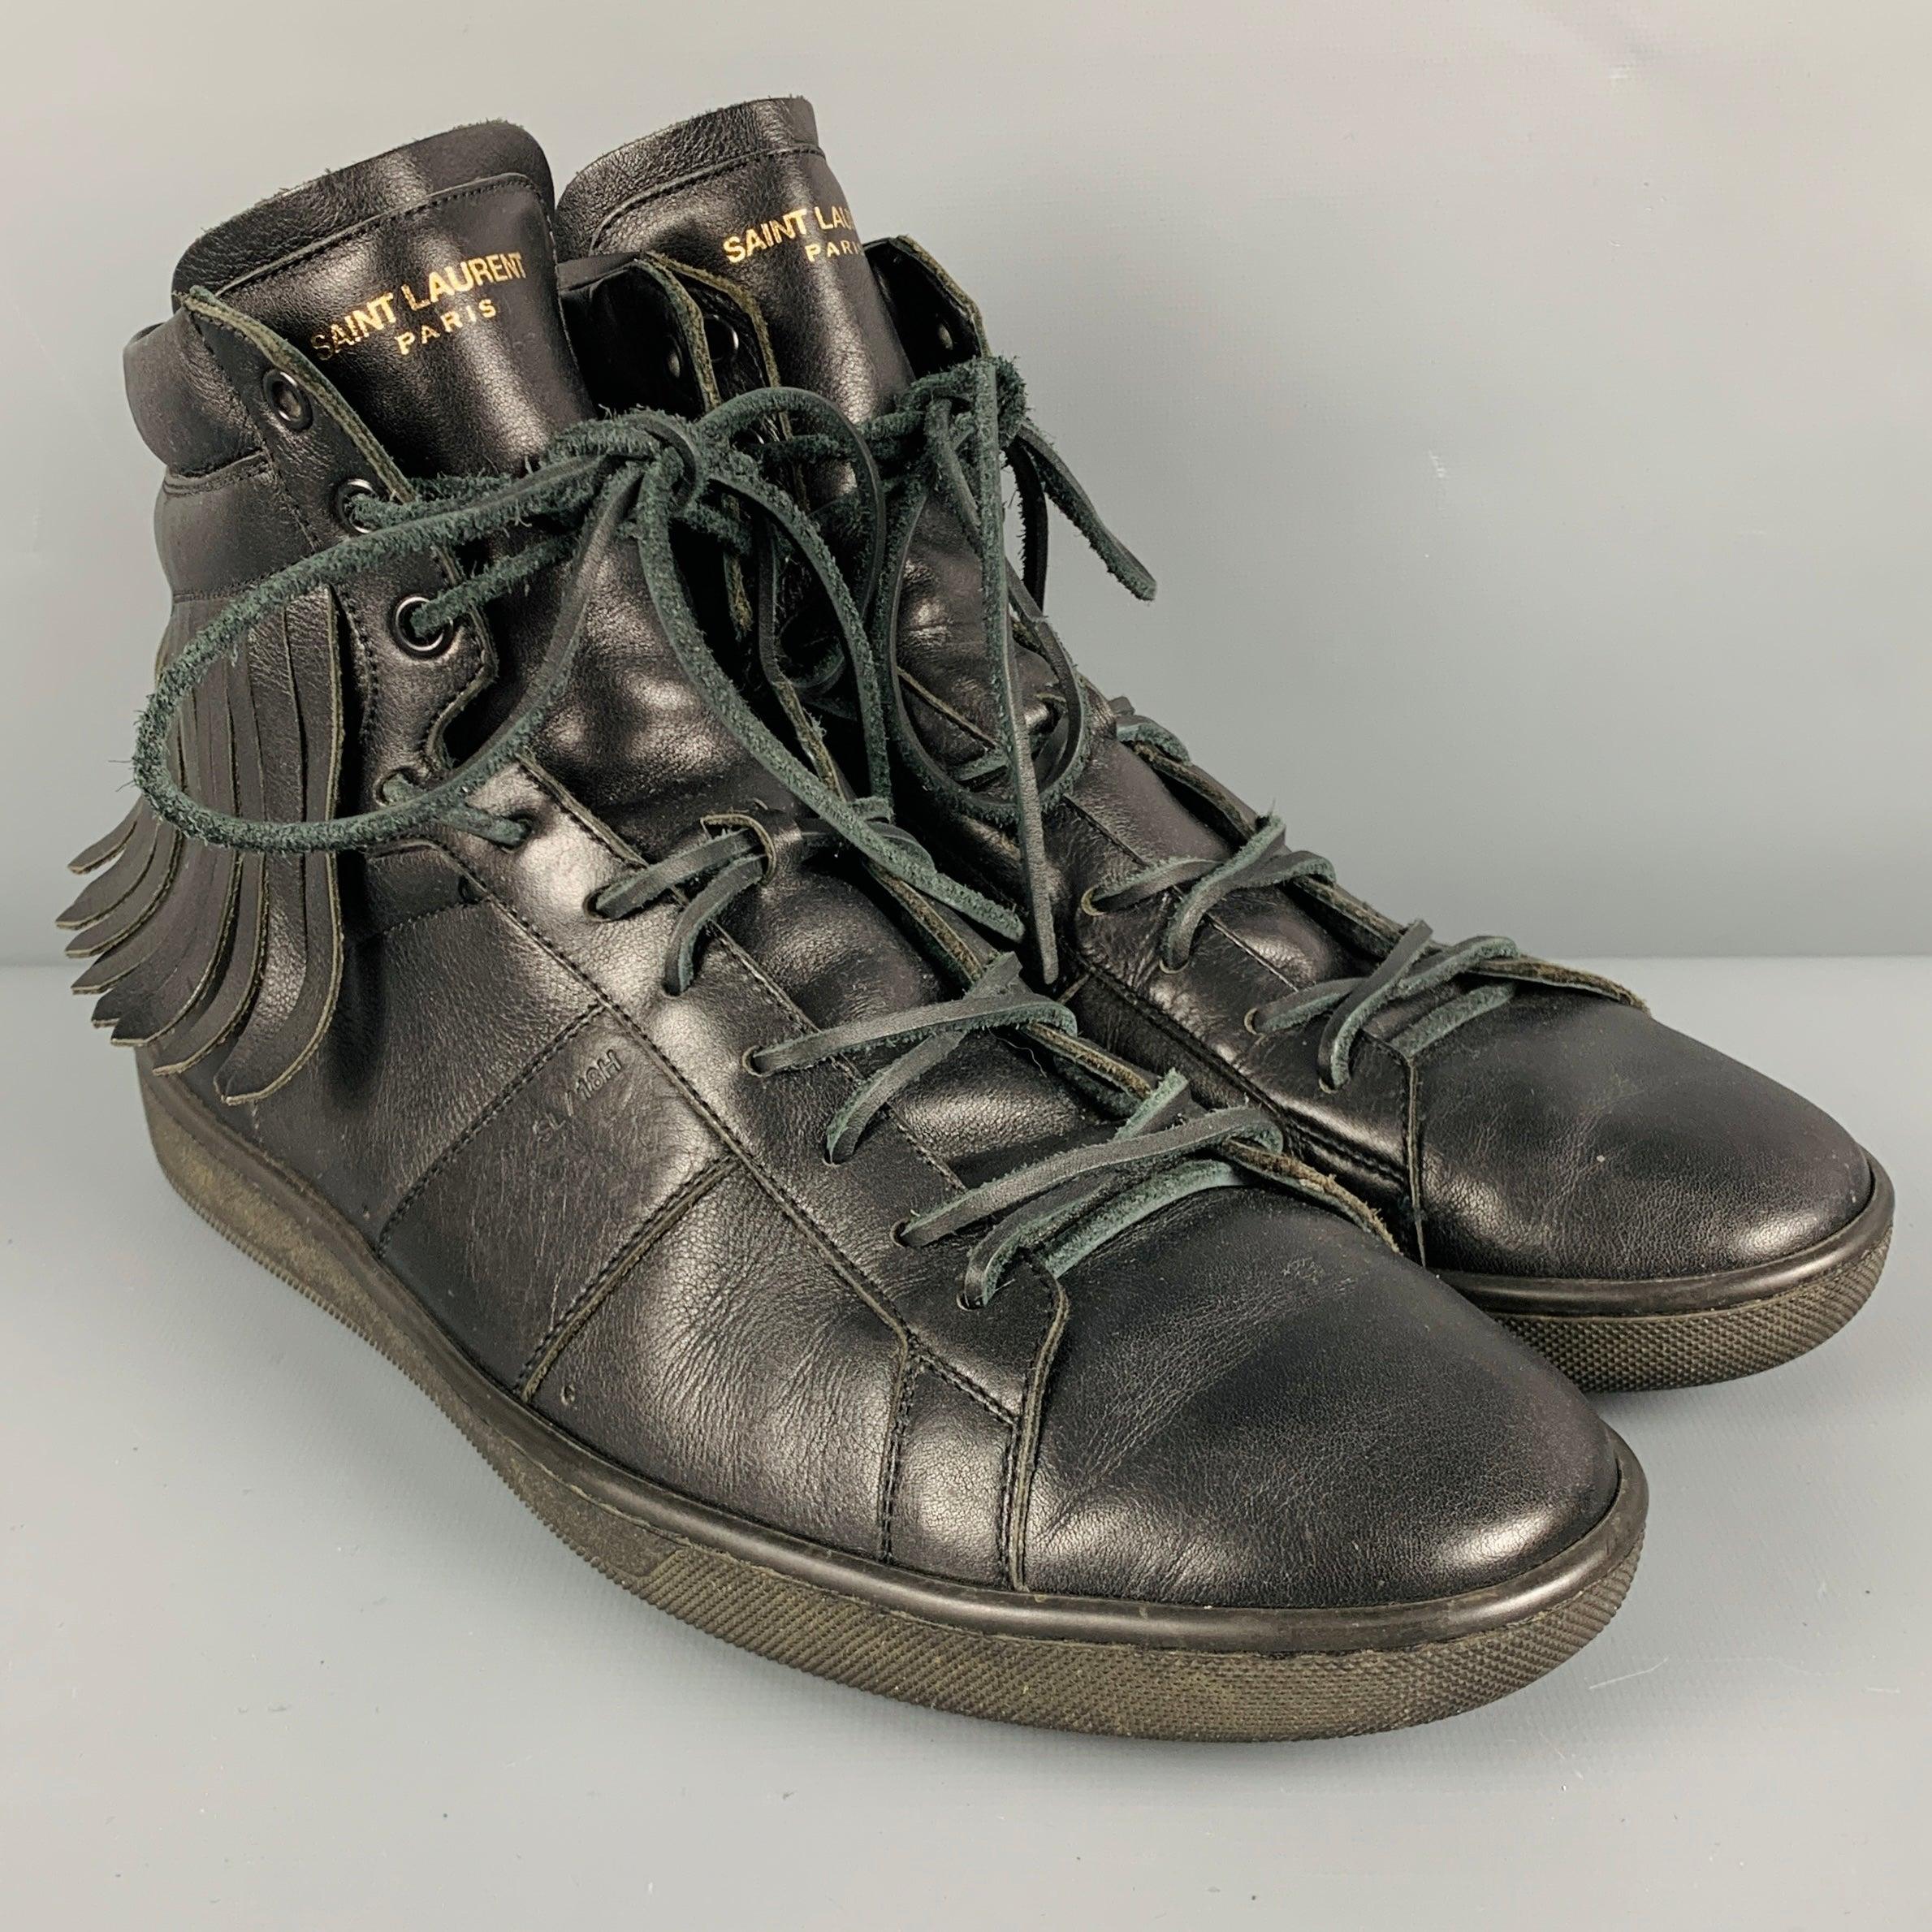 SAINT LAURENT sneakers
in a black leather fabric featuring high top style, leather fringe, and lace-up closure. Made in Italy.Very Good Pre-Owned Condition. Minor signs of wear. 

Marked:   M 376995 42.5Outsole: 11.25 inches  x 4 inches 
  
  
